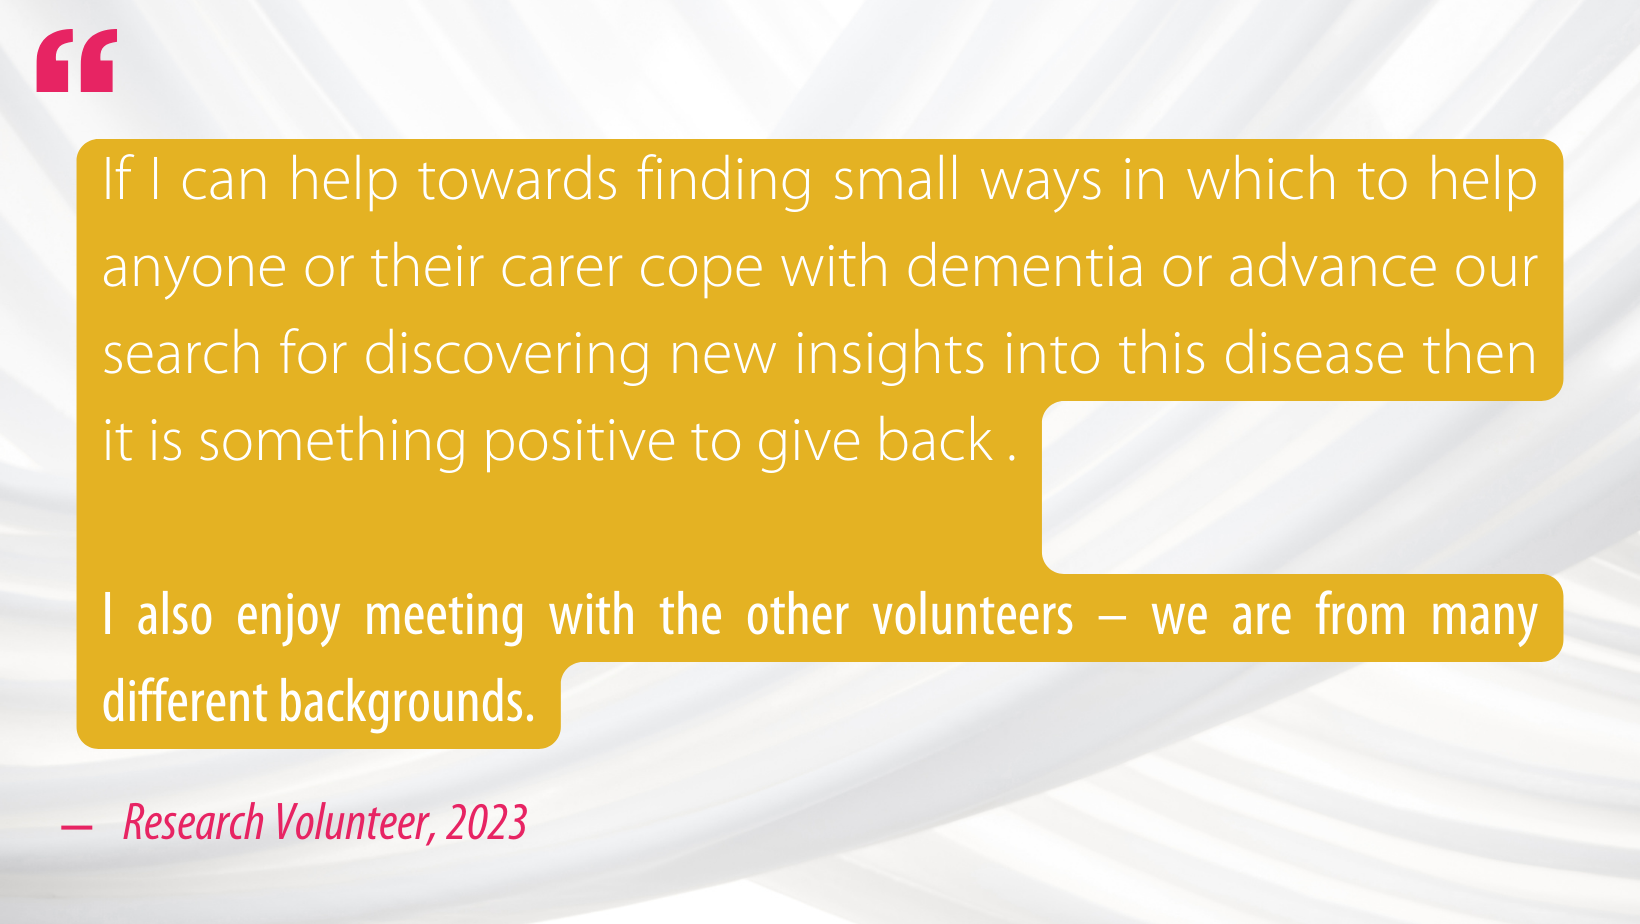 Quote from a research volunteer in 2023: If I can help towards finding small ways in which to help anyone or their carer cope with dementia or advance our search for discovering new insights into this disease then it is something positive to give back .

I also enjoy meeting with the other volunteers – we are from many different backgrounds.